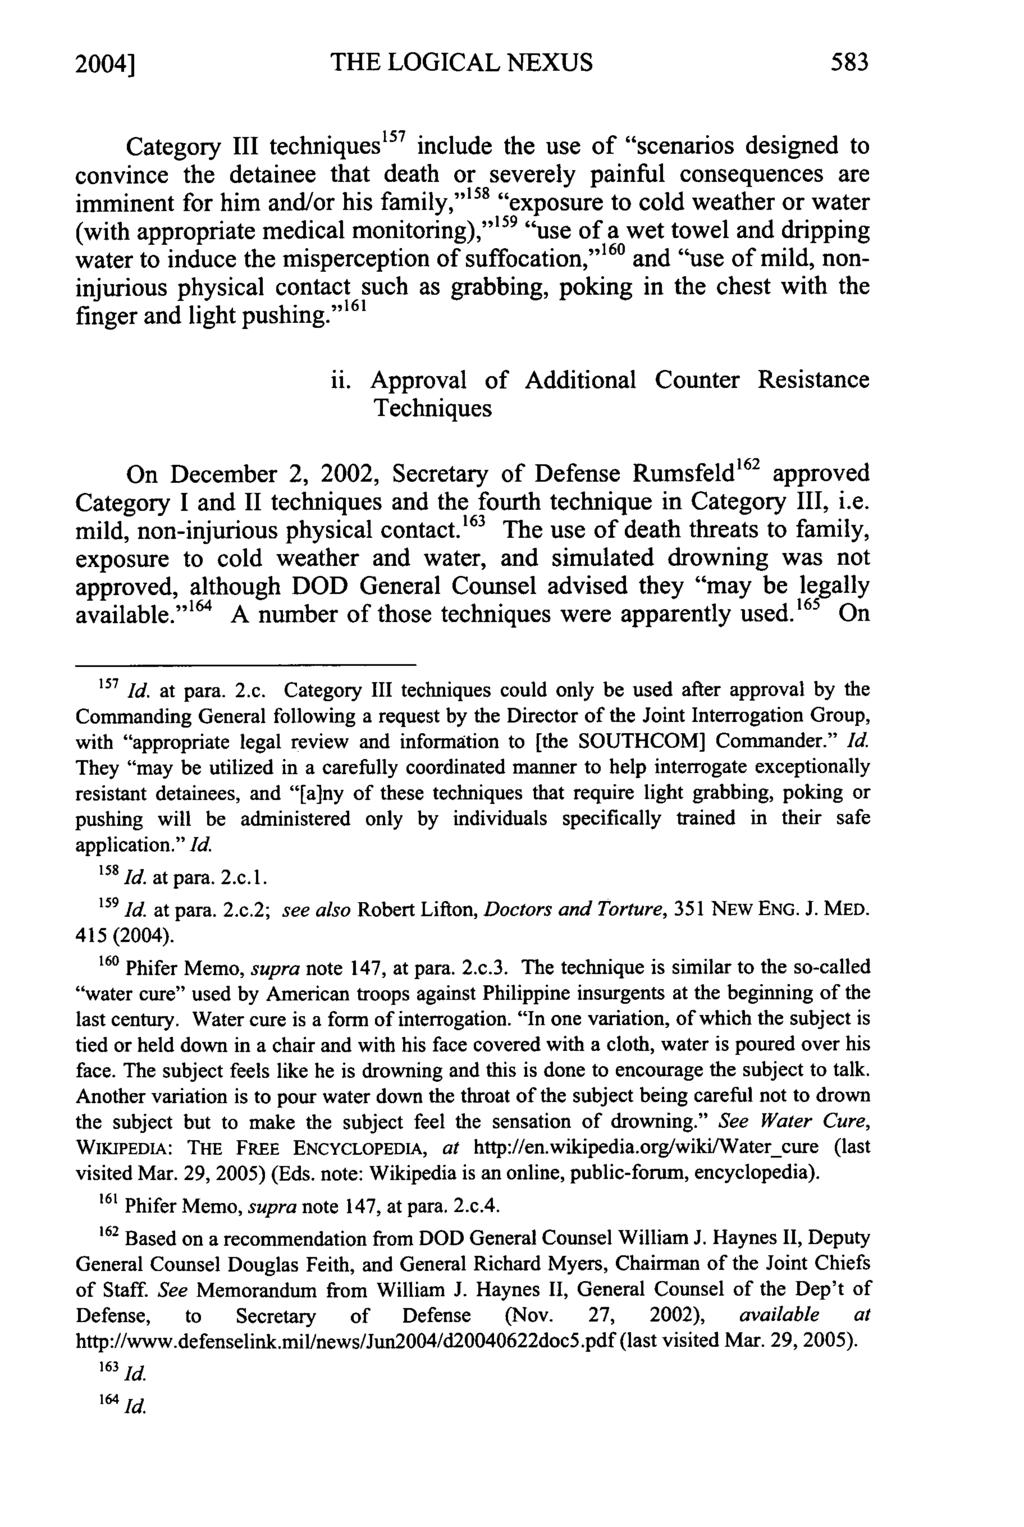 2004] THE LOGICAL NEXUS Category III techniques 157 include the use of "scenarios designed to convince the detainee that death or severely painful consequences are imminent for him and/or his family,